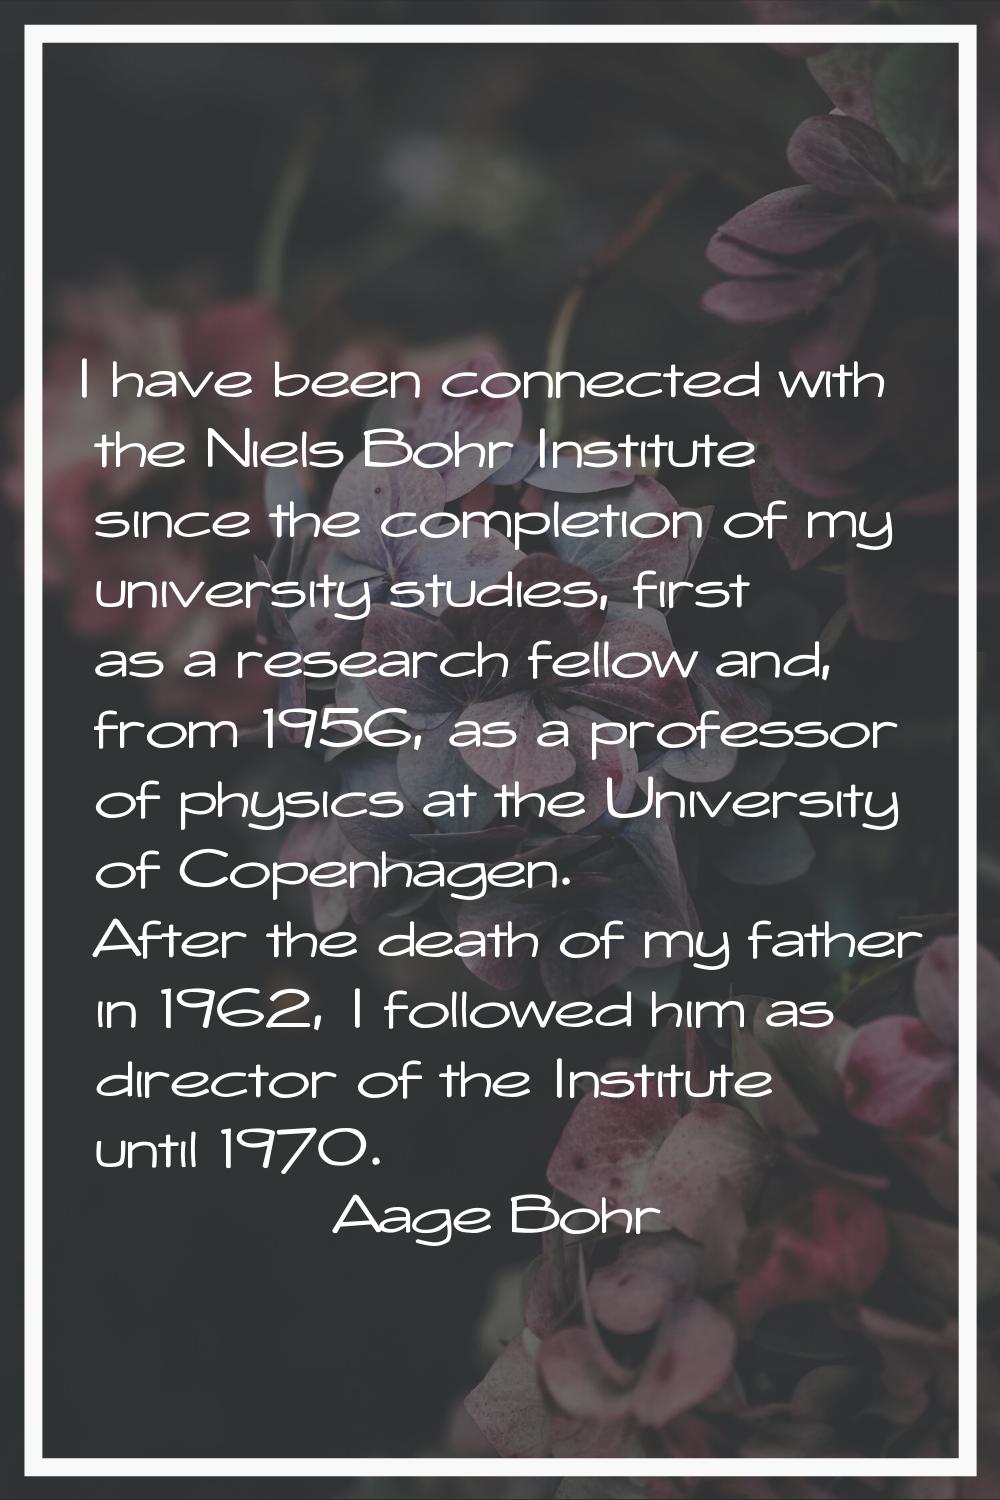 I have been connected with the Niels Bohr Institute since the completion of my university studies, 